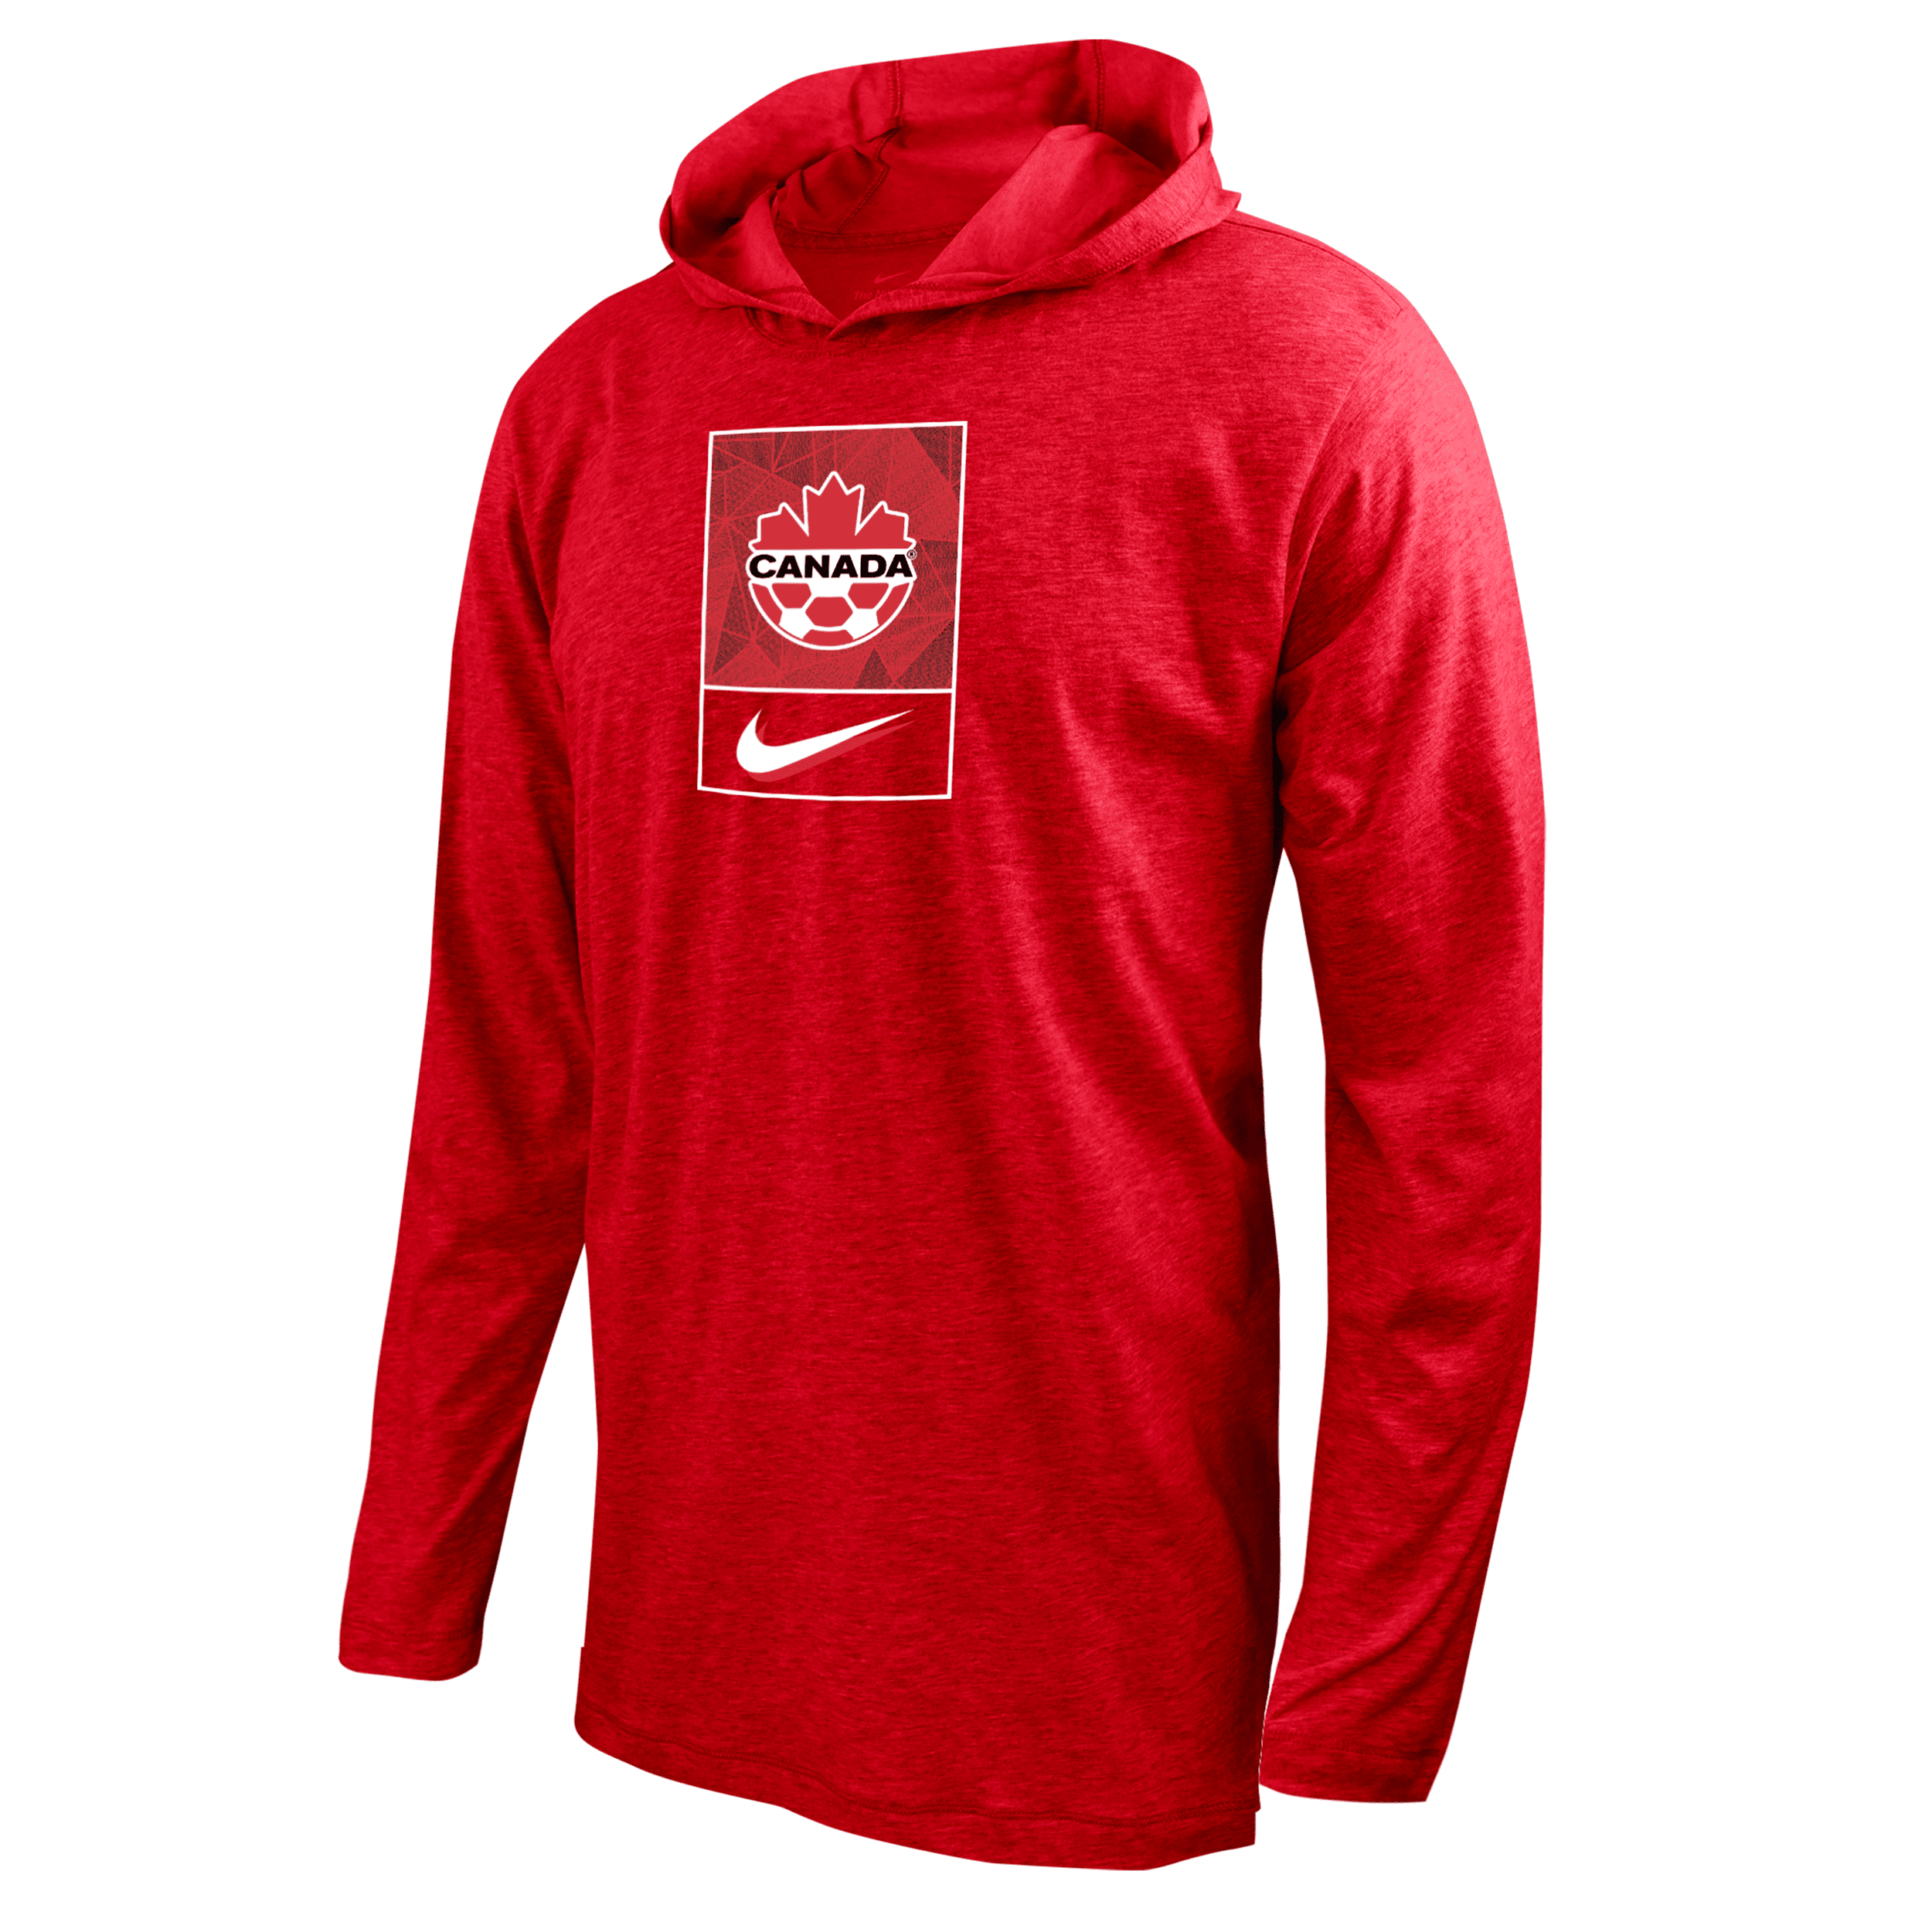 Nike Canada  Men's Soccer Long-sleeve Hooded T-shirt In Red